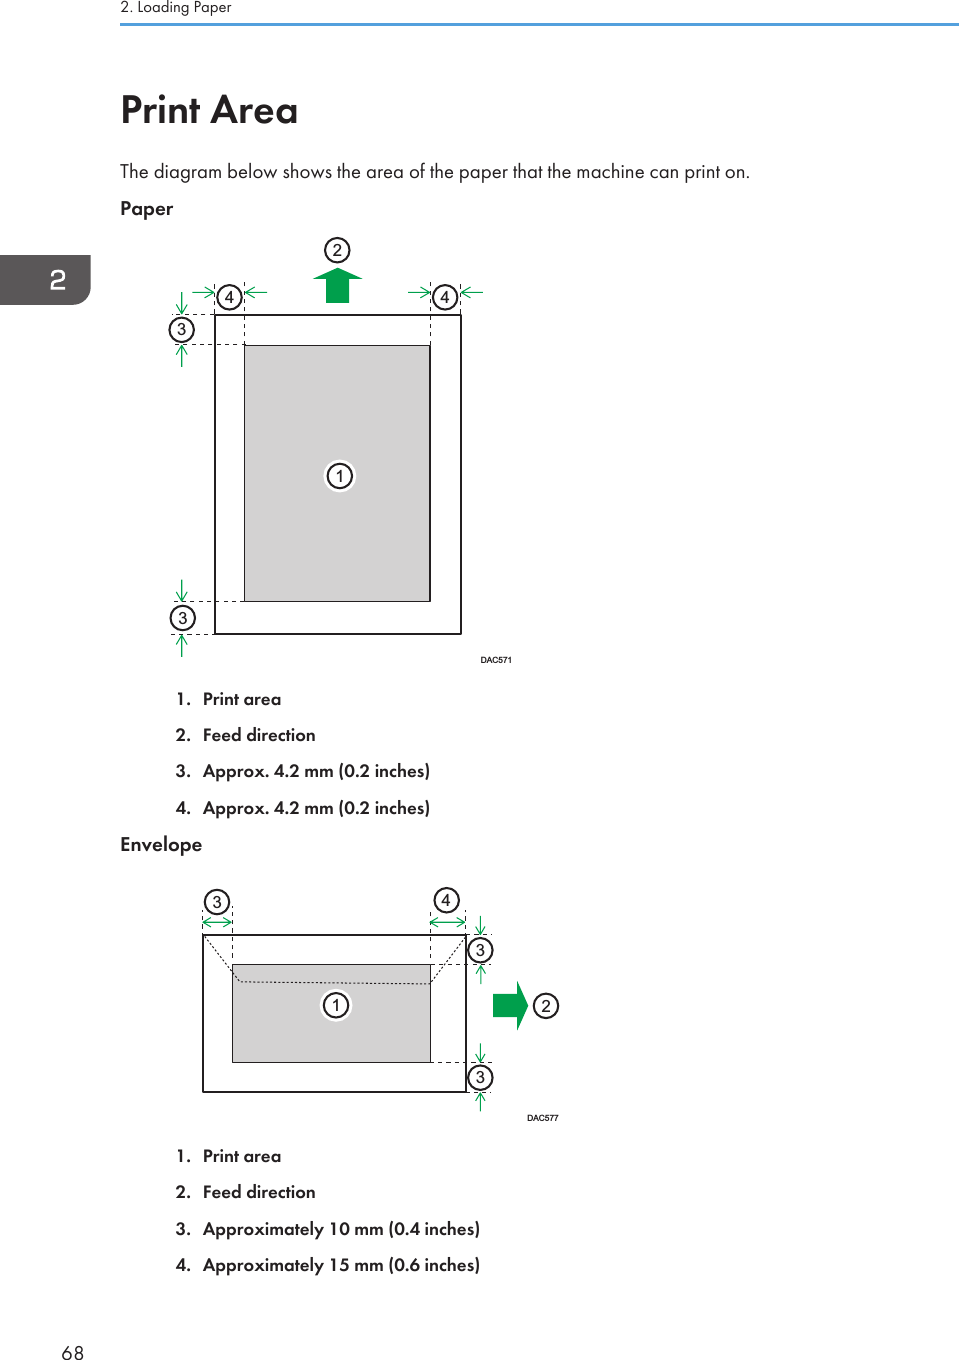 Print AreaThe diagram below shows the area of the paper that the machine can print on.PaperDAC5711243341. Print area2. Feed direction3. Approx. 4.2 mm (0.2 inches)4. Approx. 4.2 mm (0.2 inches)Envelope412333DAC5771. Print area2. Feed direction3. Approximately 10 mm (0.4 inches)4. Approximately 15 mm (0.6 inches)2. Loading Paper68